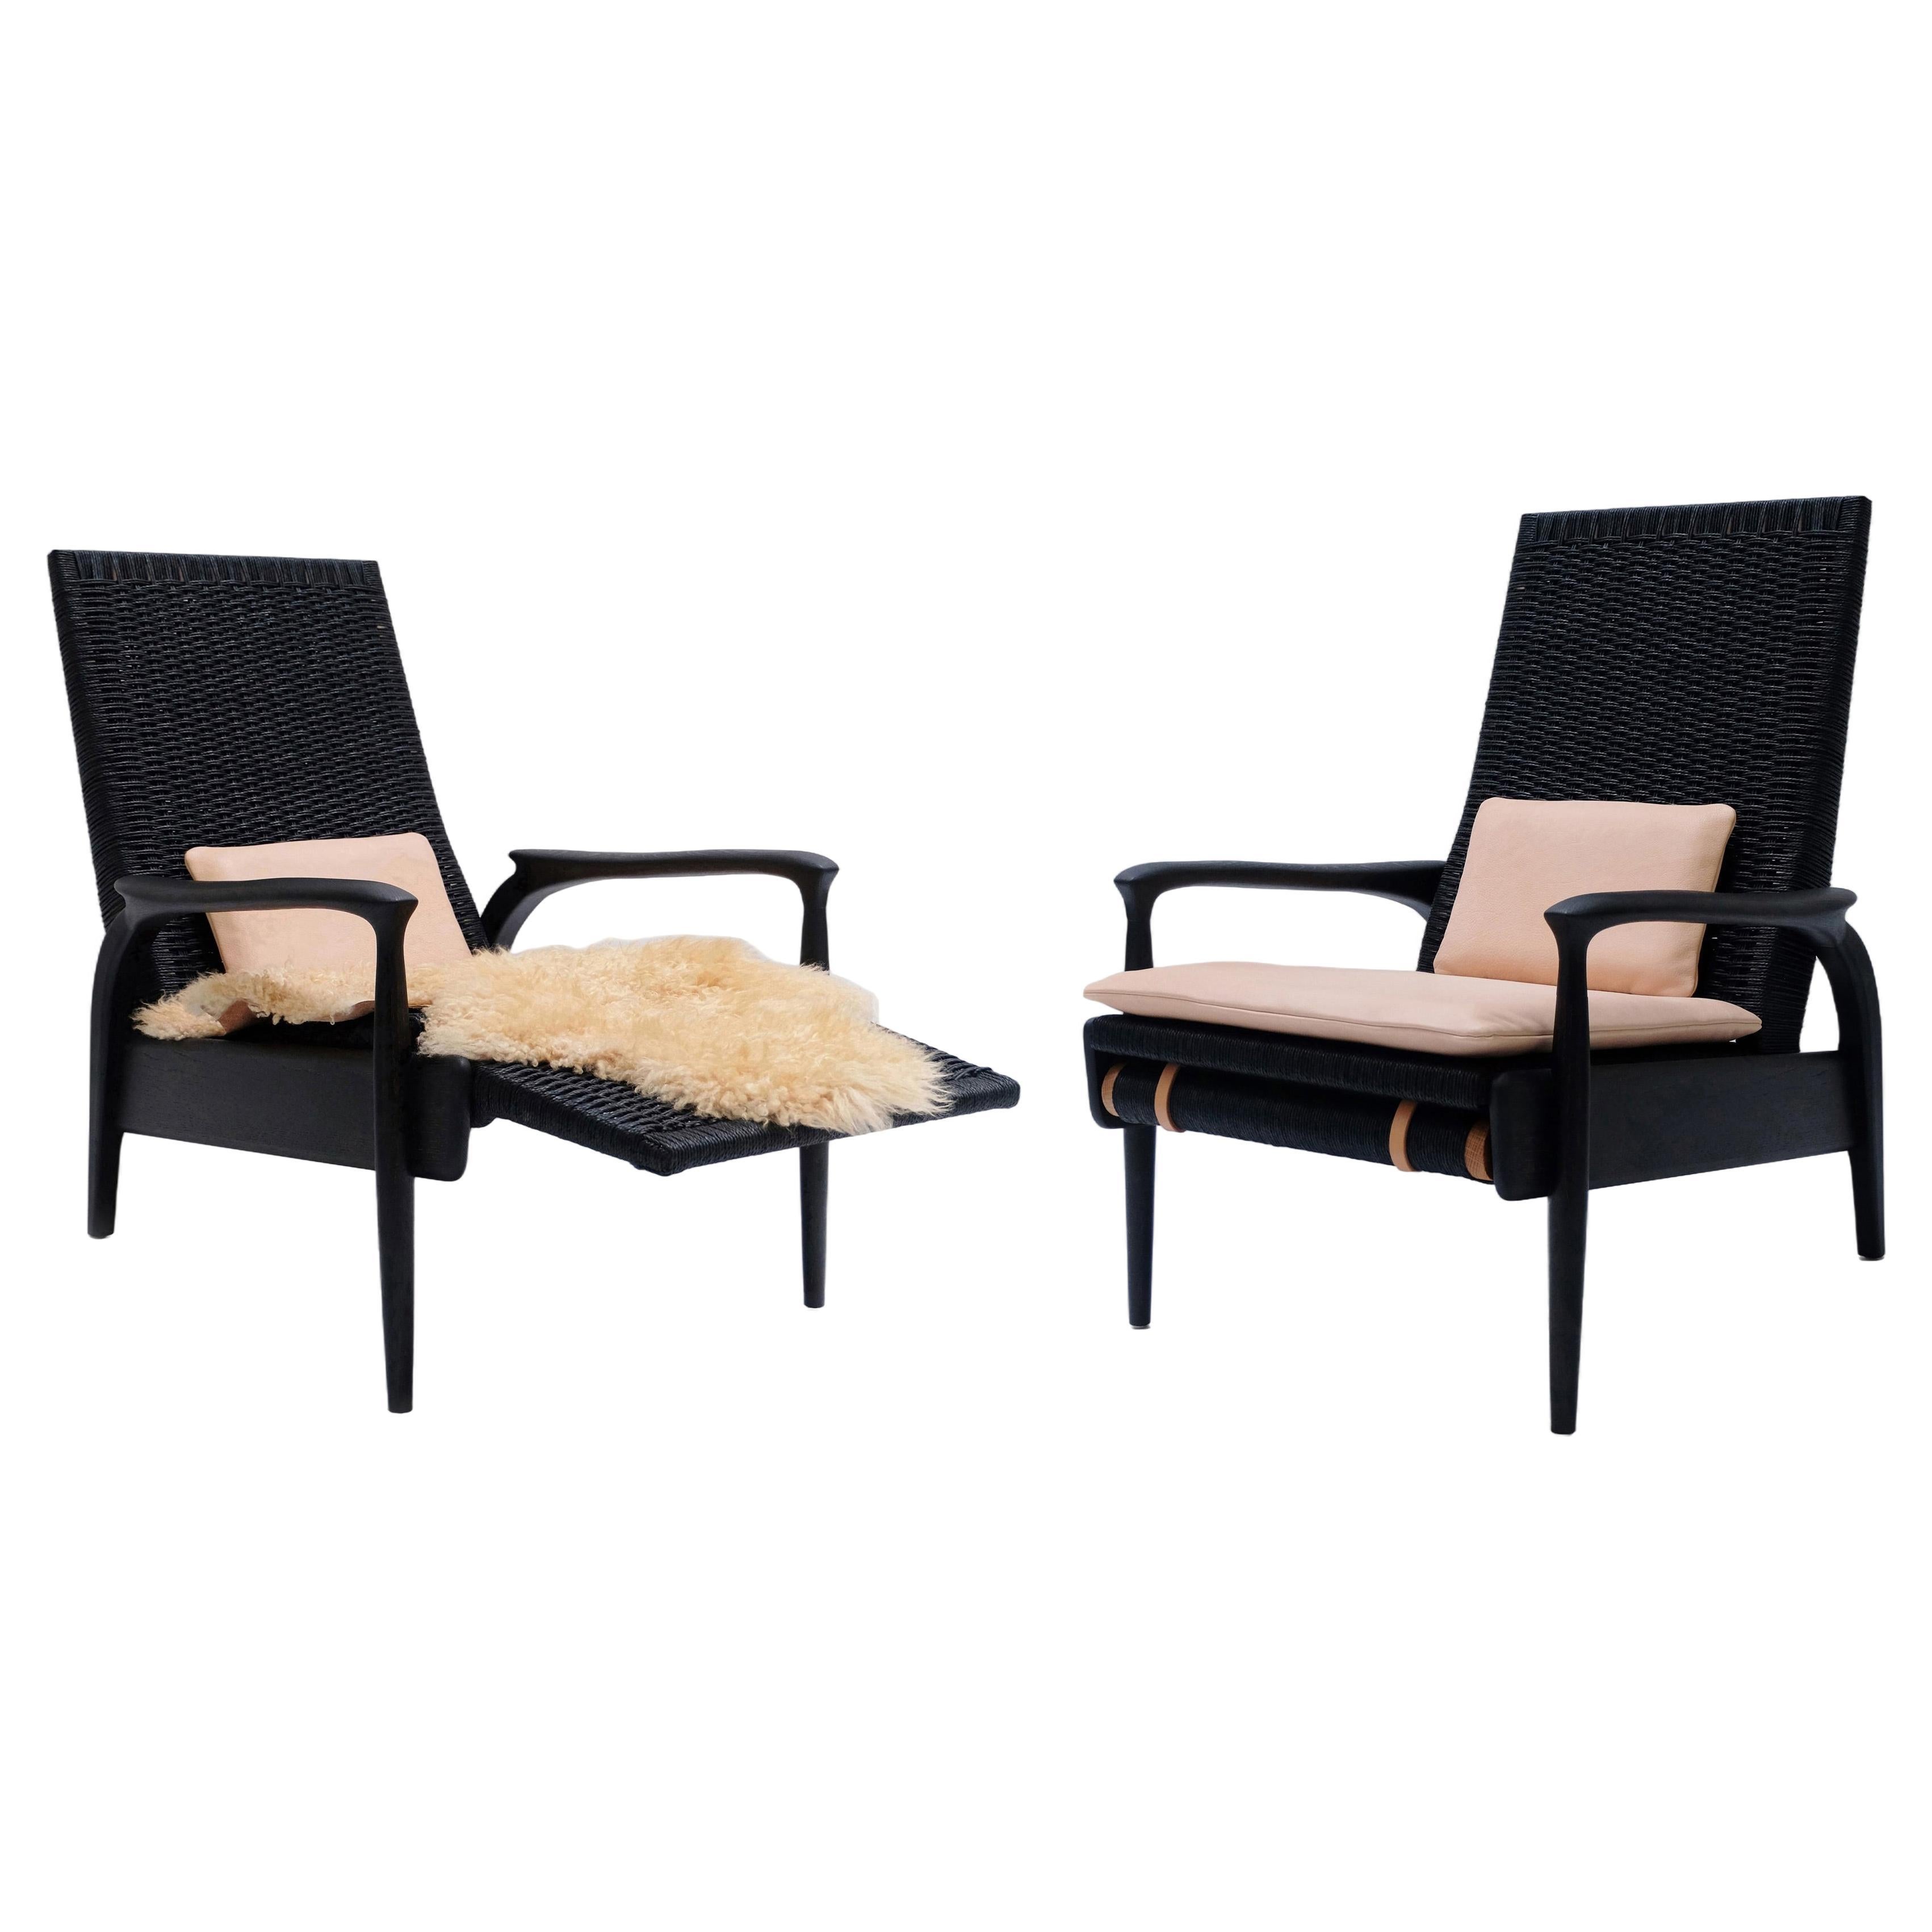 Pair of Reclining Armchairs, Blackened Oak, Black Danish Cord, Leather Cushions For Sale